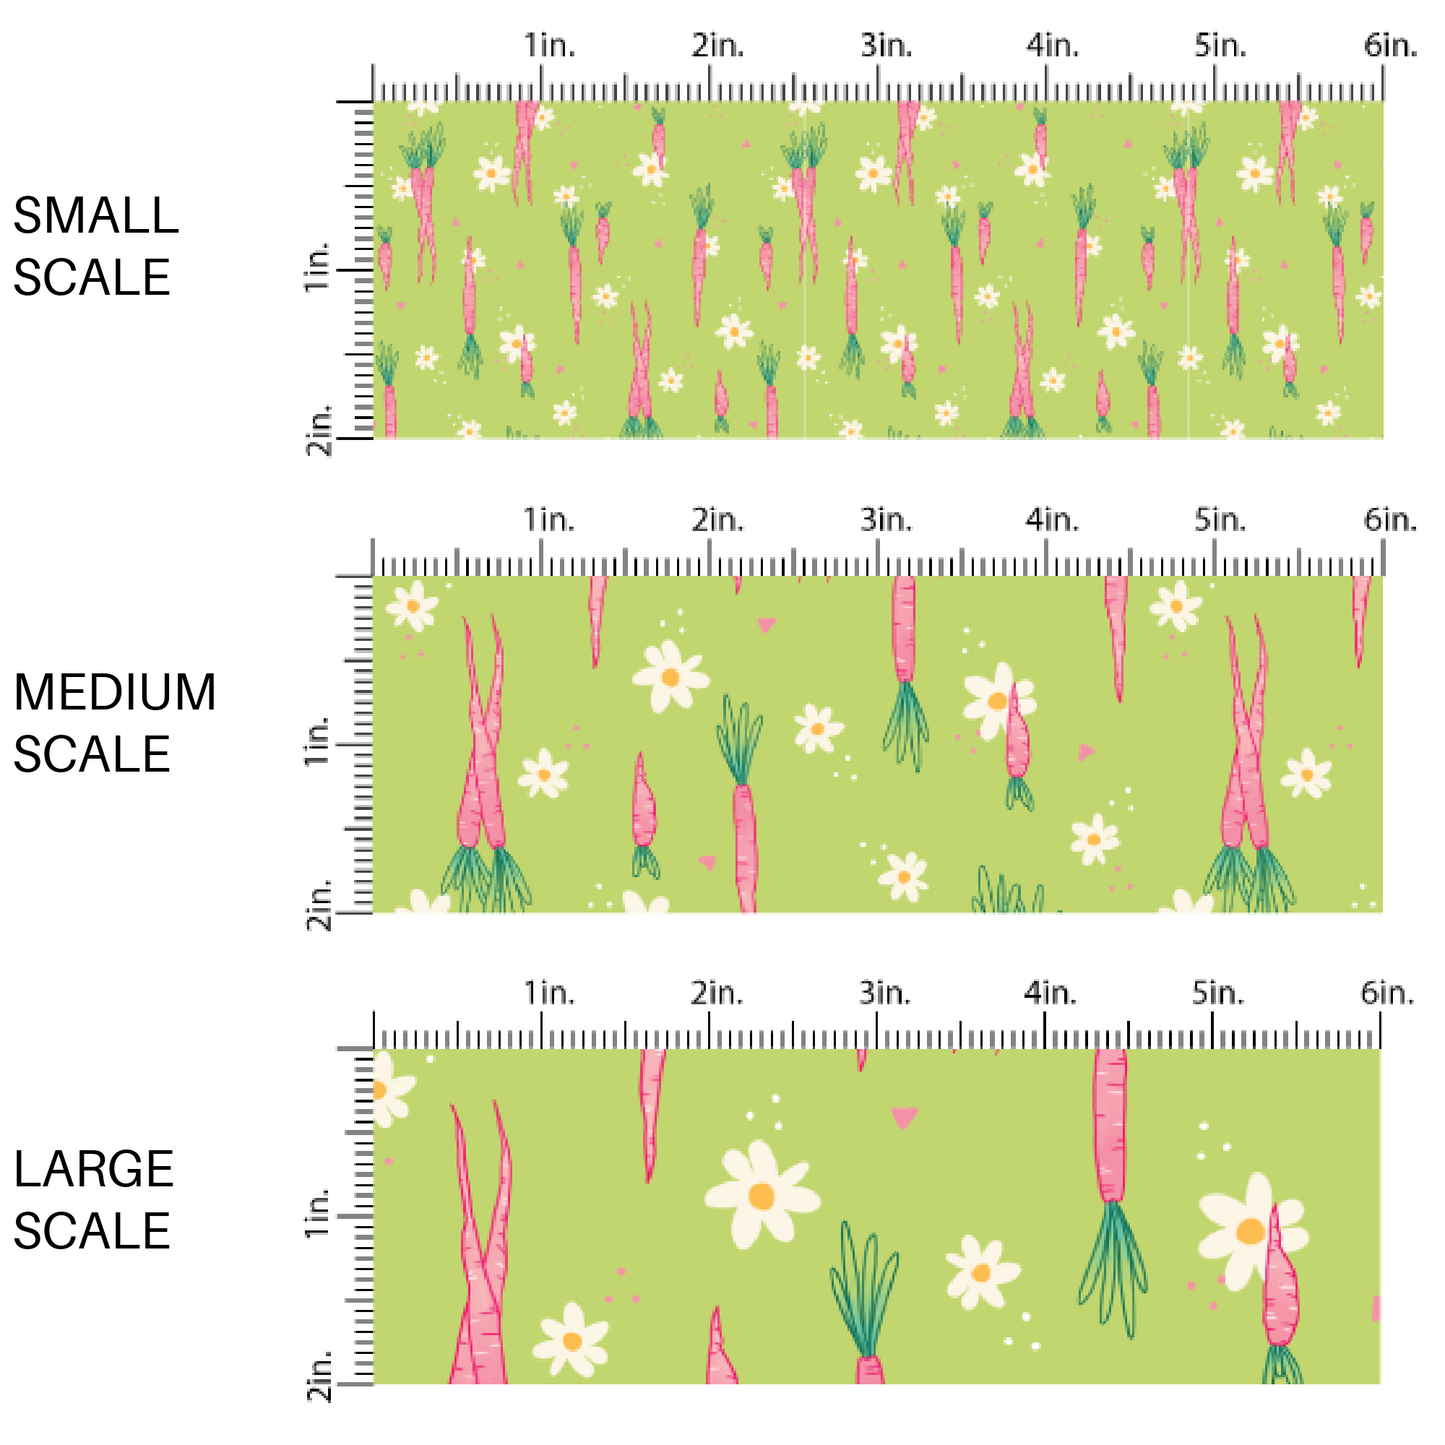 lime green fabric by the yard scaled image guide with scattered white daisies and pink carrots